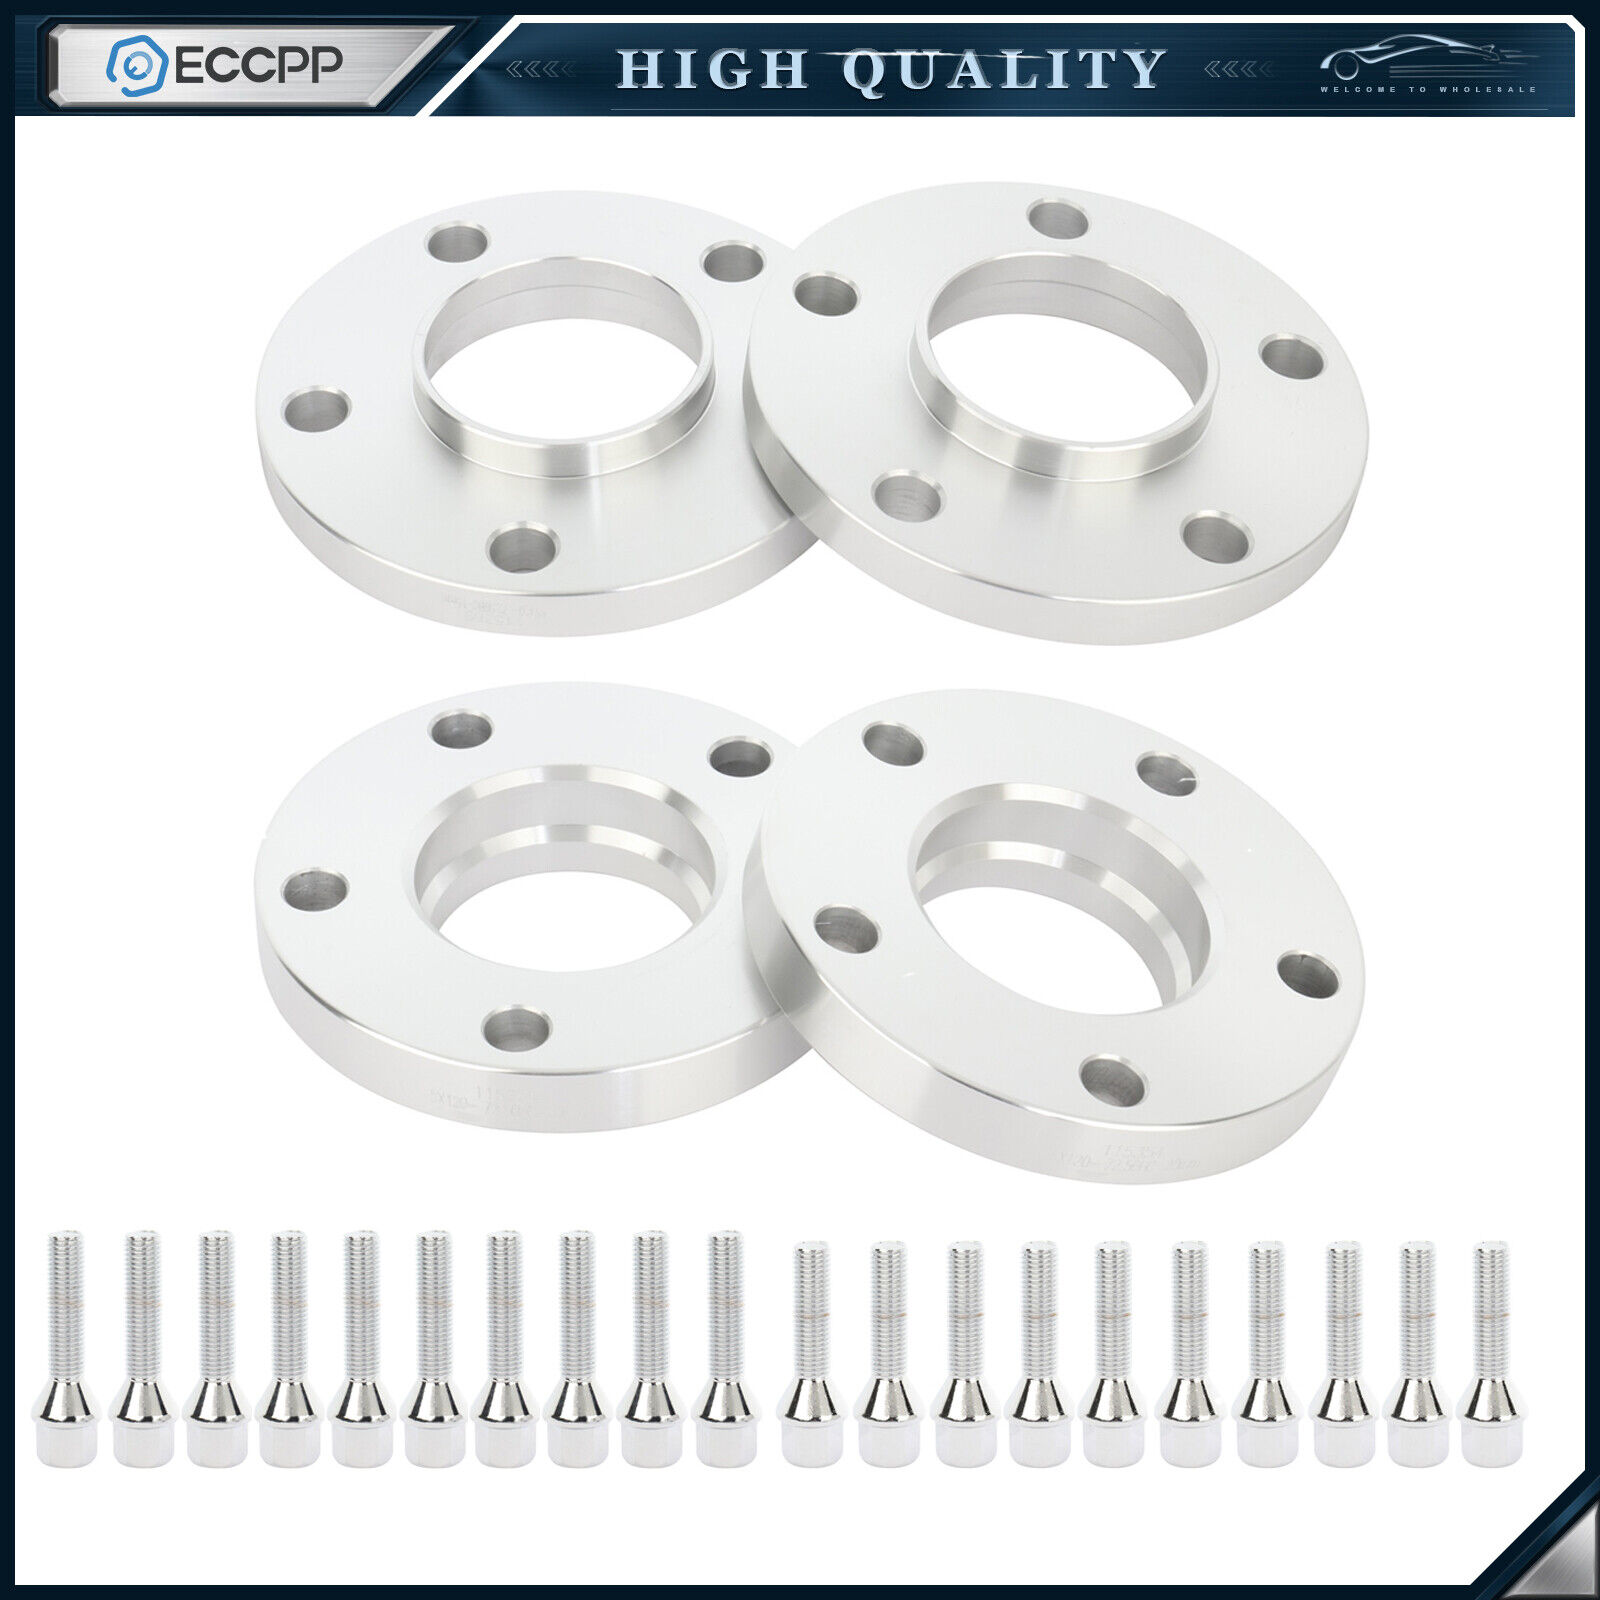 4Pcs (15mm & 20mm) Hub Centric Wheel Spacers 5x120 W/ 12x1.5 Cone Seat For BMW